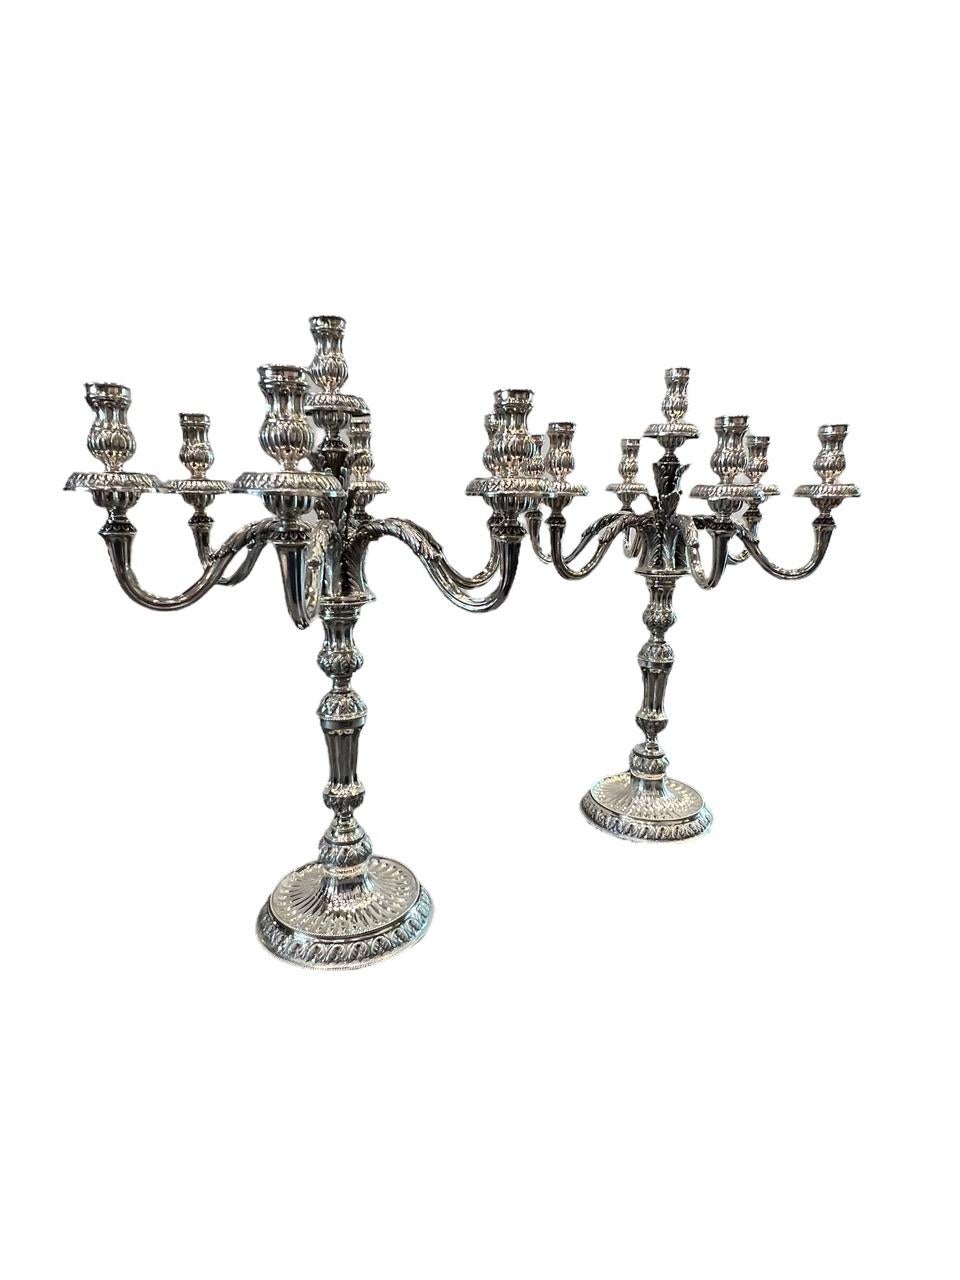 1910 Italian Pair of Sterling Silver Candelabras, Tall and Heavy For Sale 2